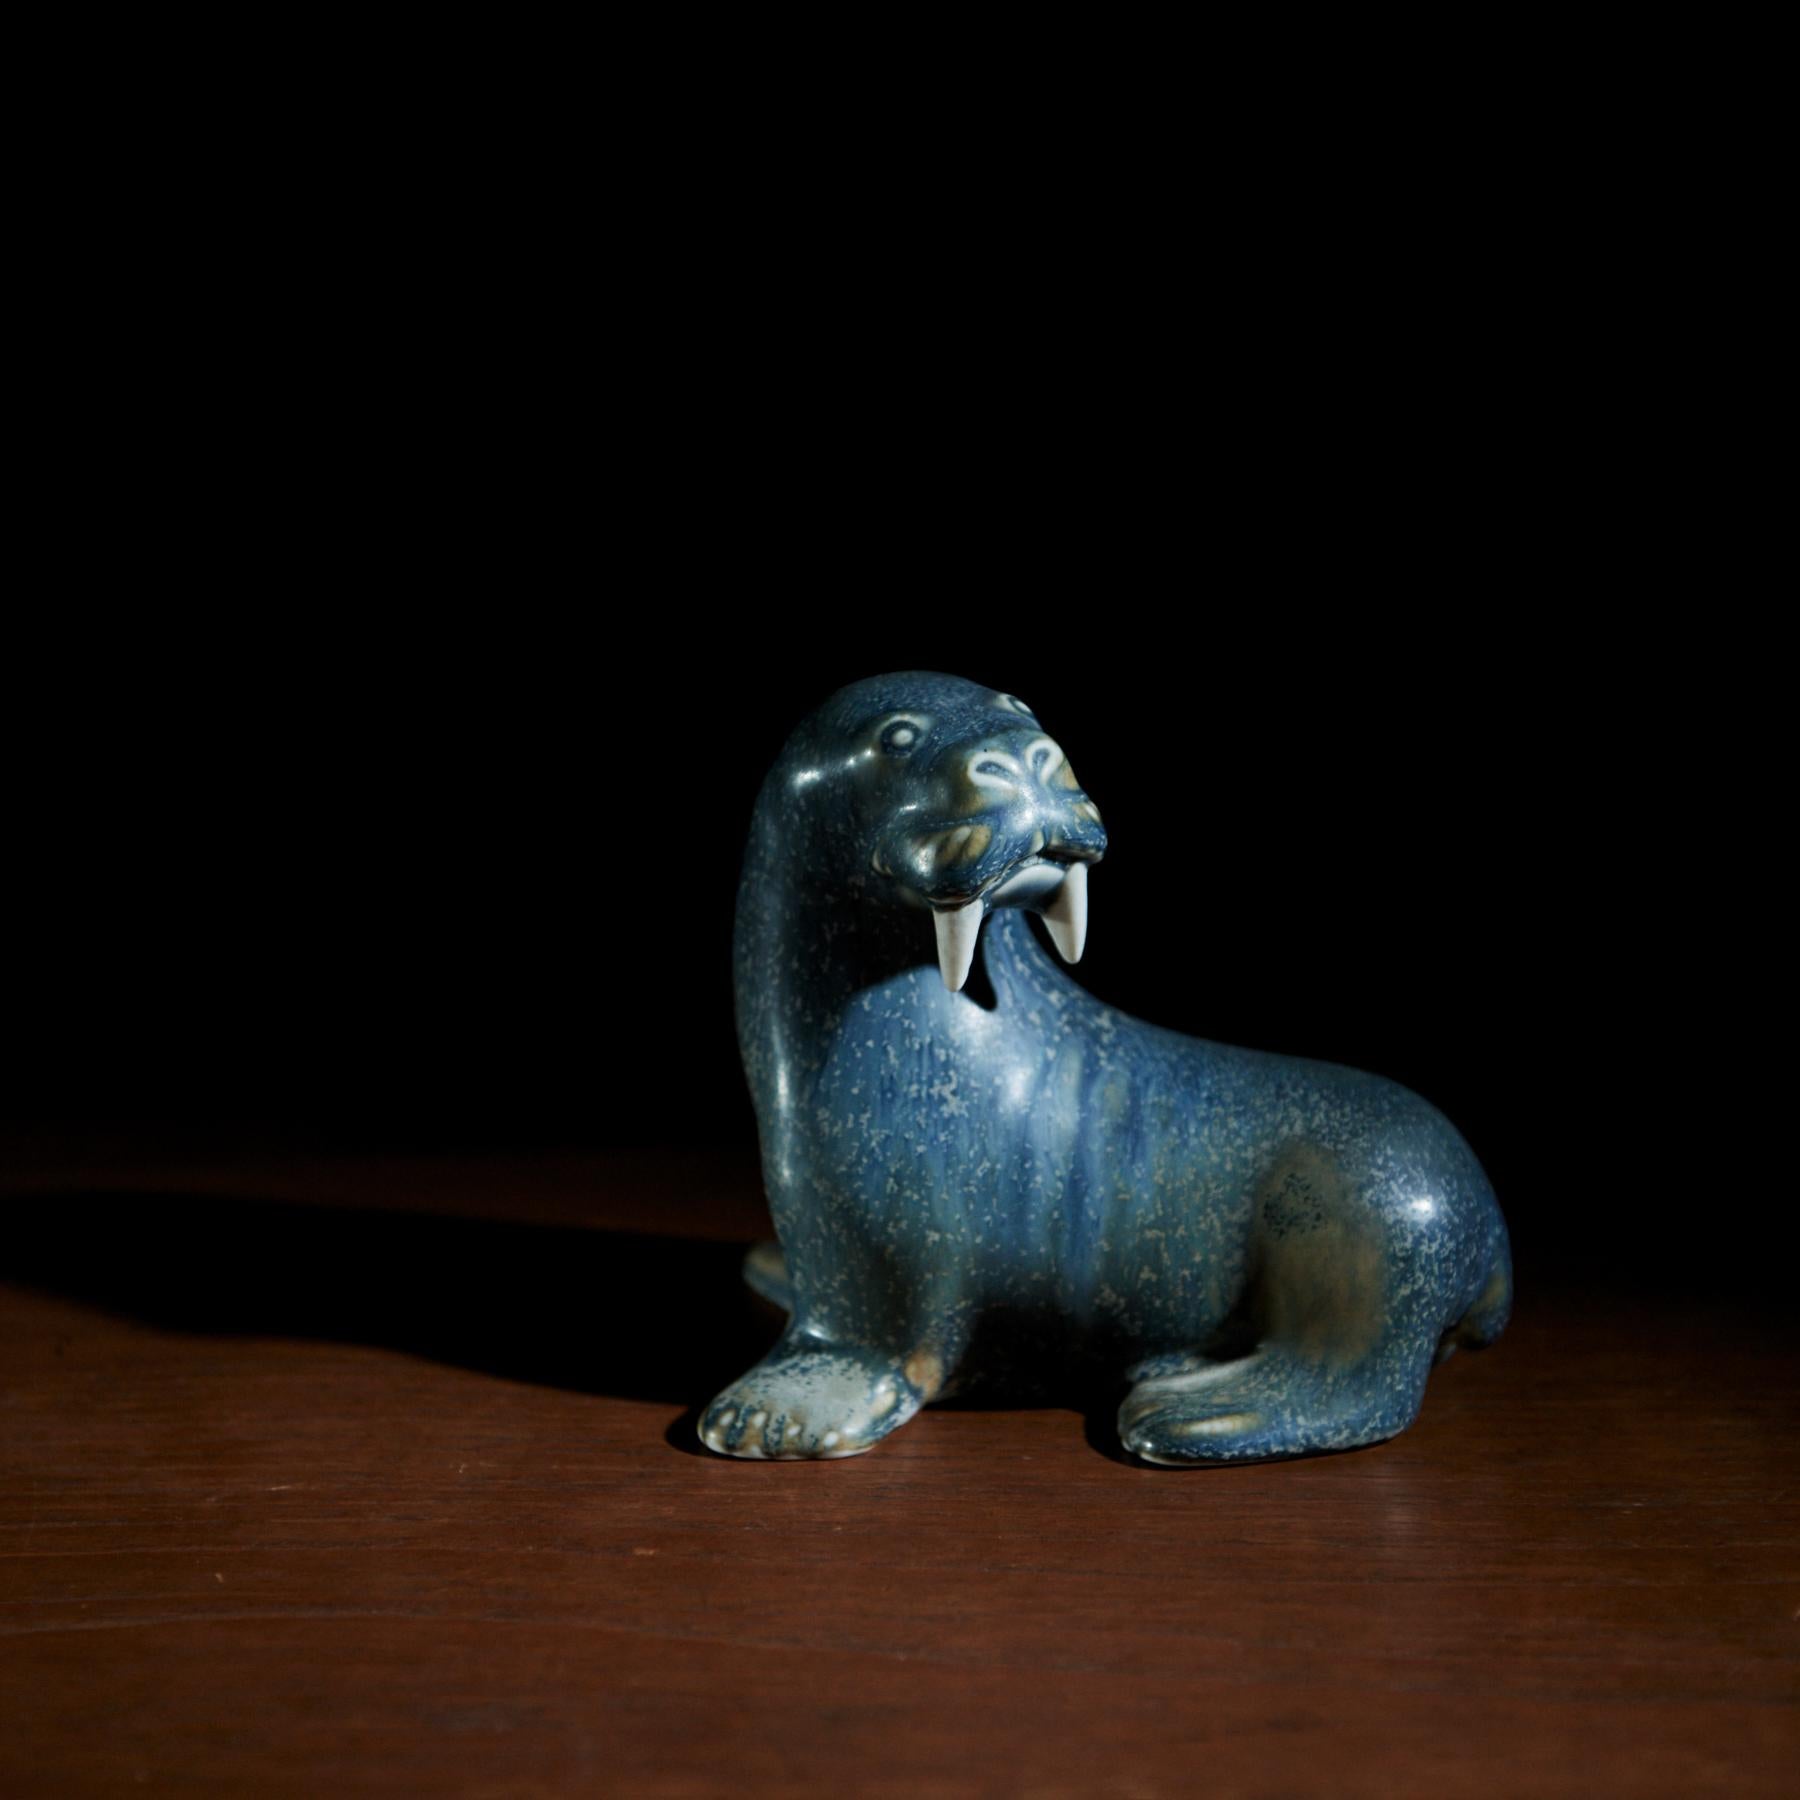 Walrus by Gunnar Nylund
Stoneware figurine from Rörstrand.
Gunnar Nylund became well known for a vast and diversified production of stoneware animal sculptures, which he designed for Rörstrand between the 1930s and 1960s.⁠